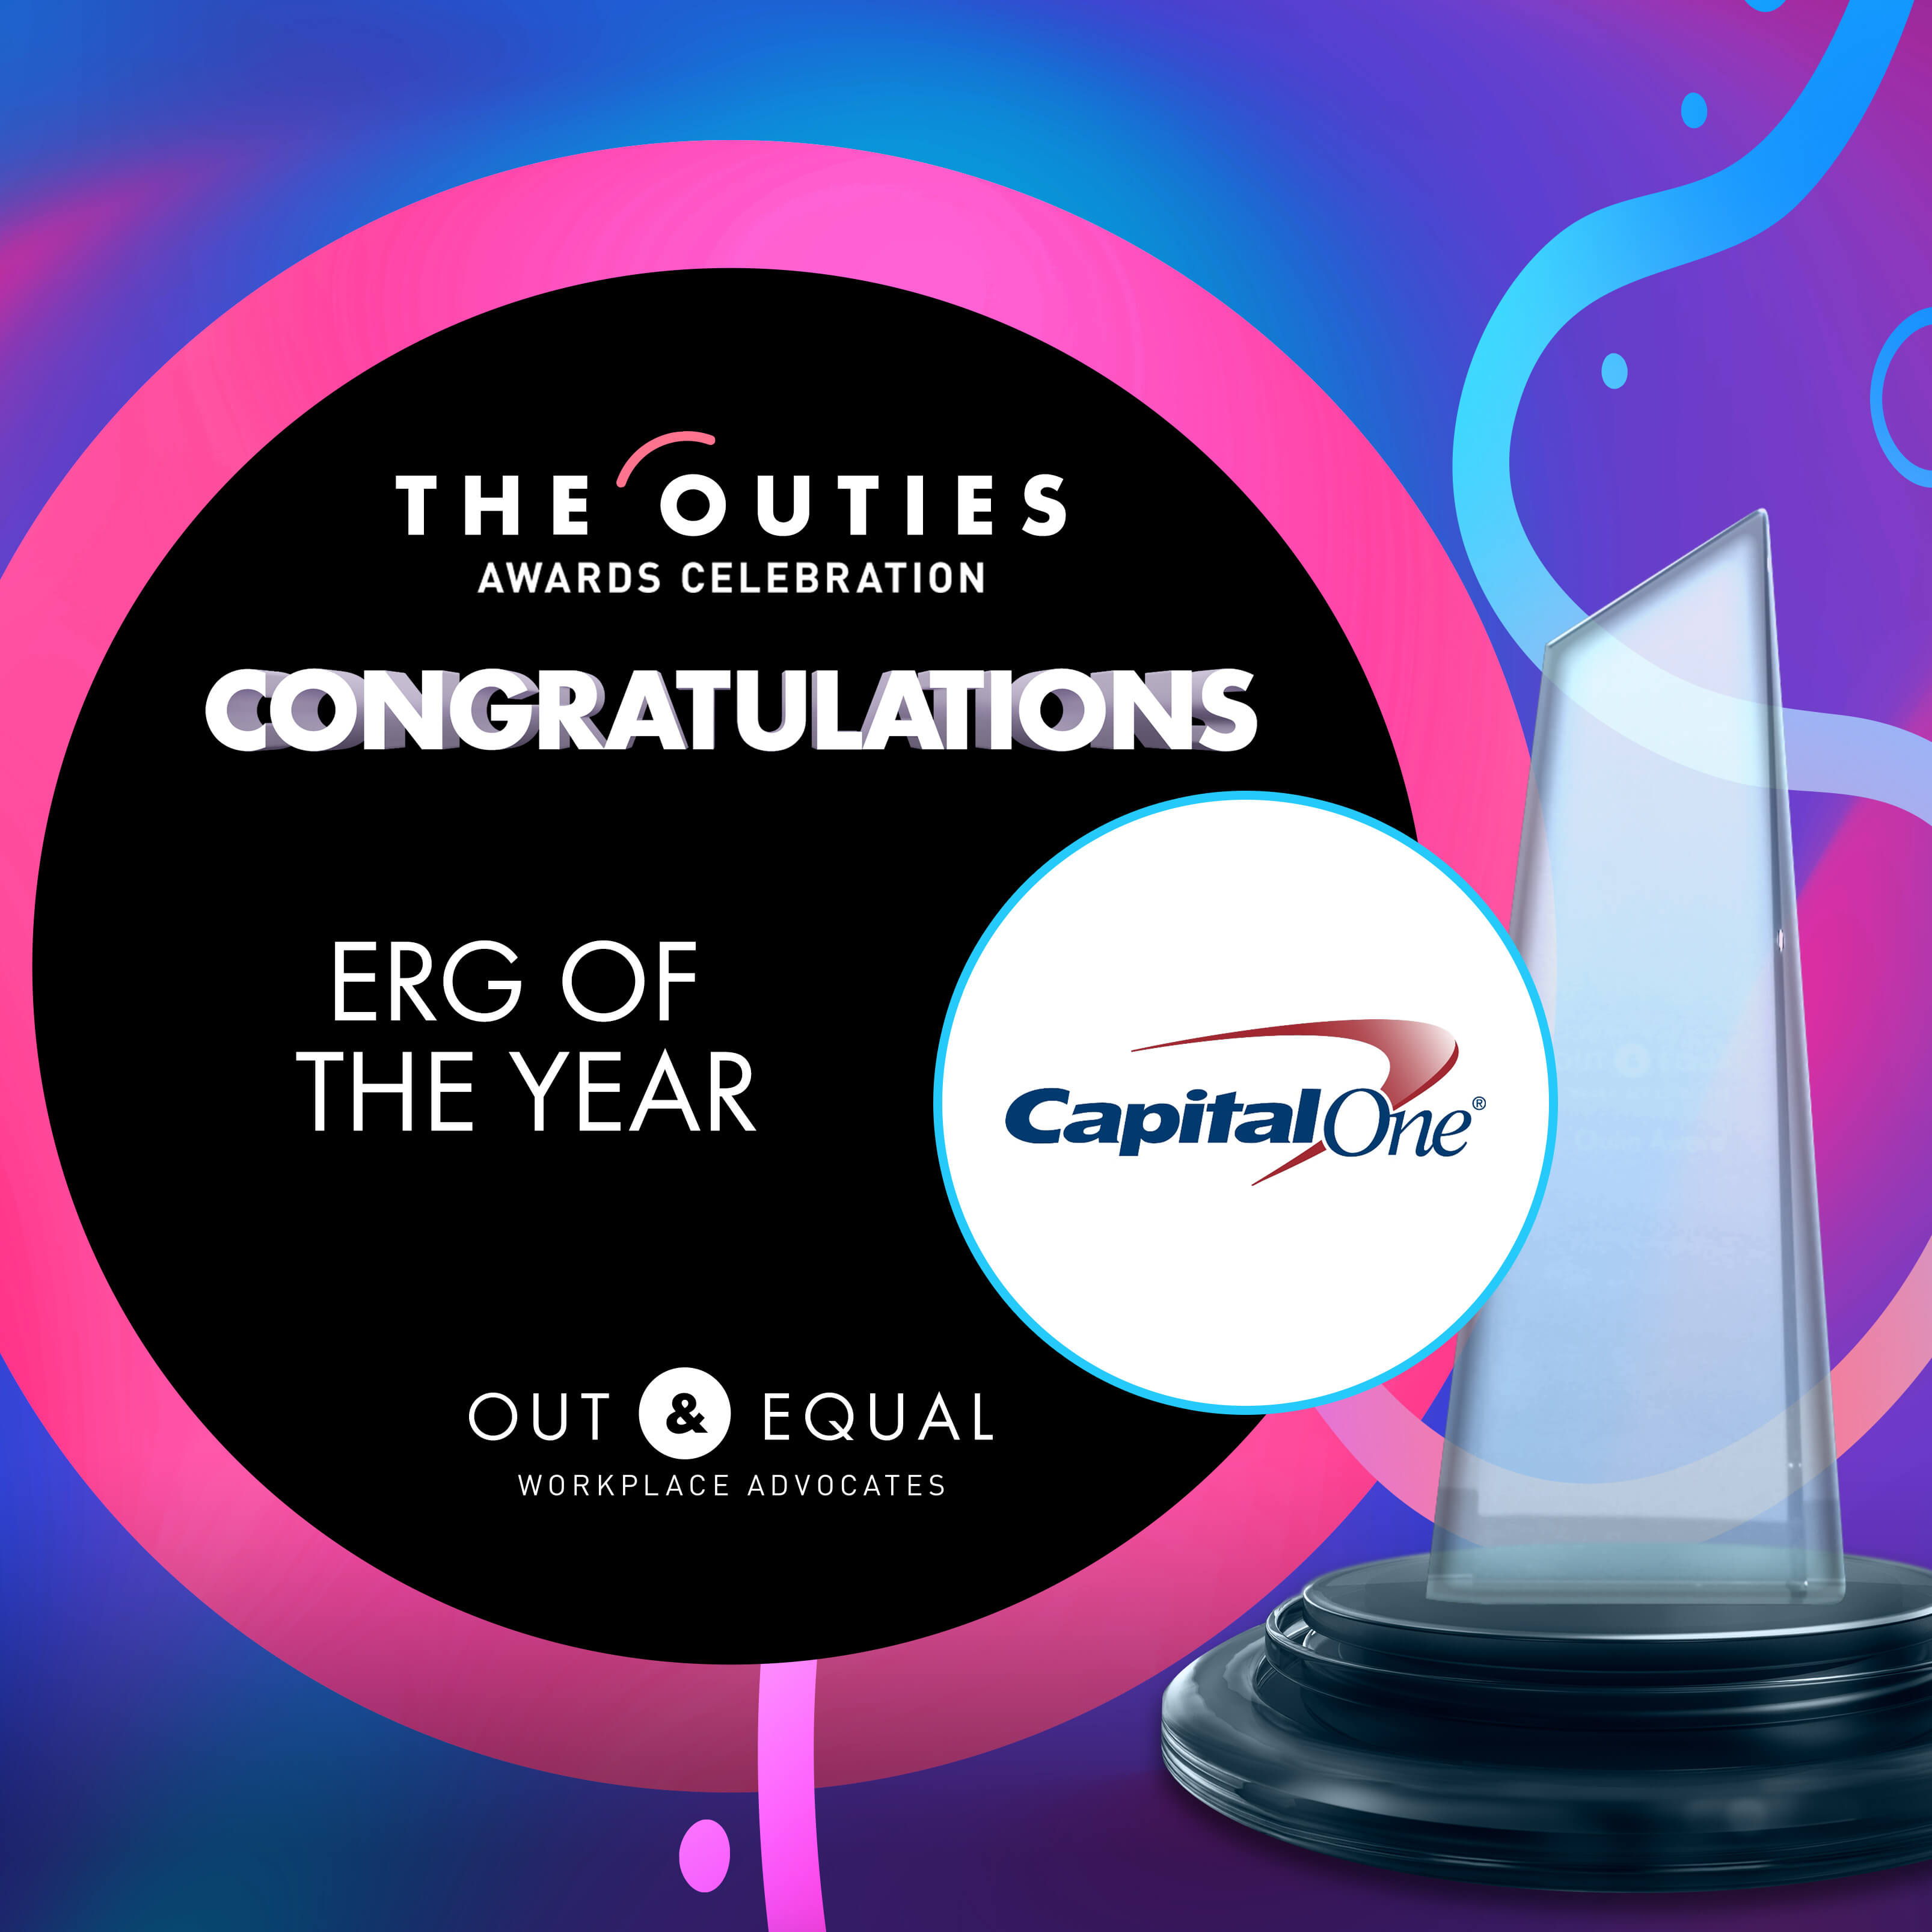 ERG of the year award given to Capital One